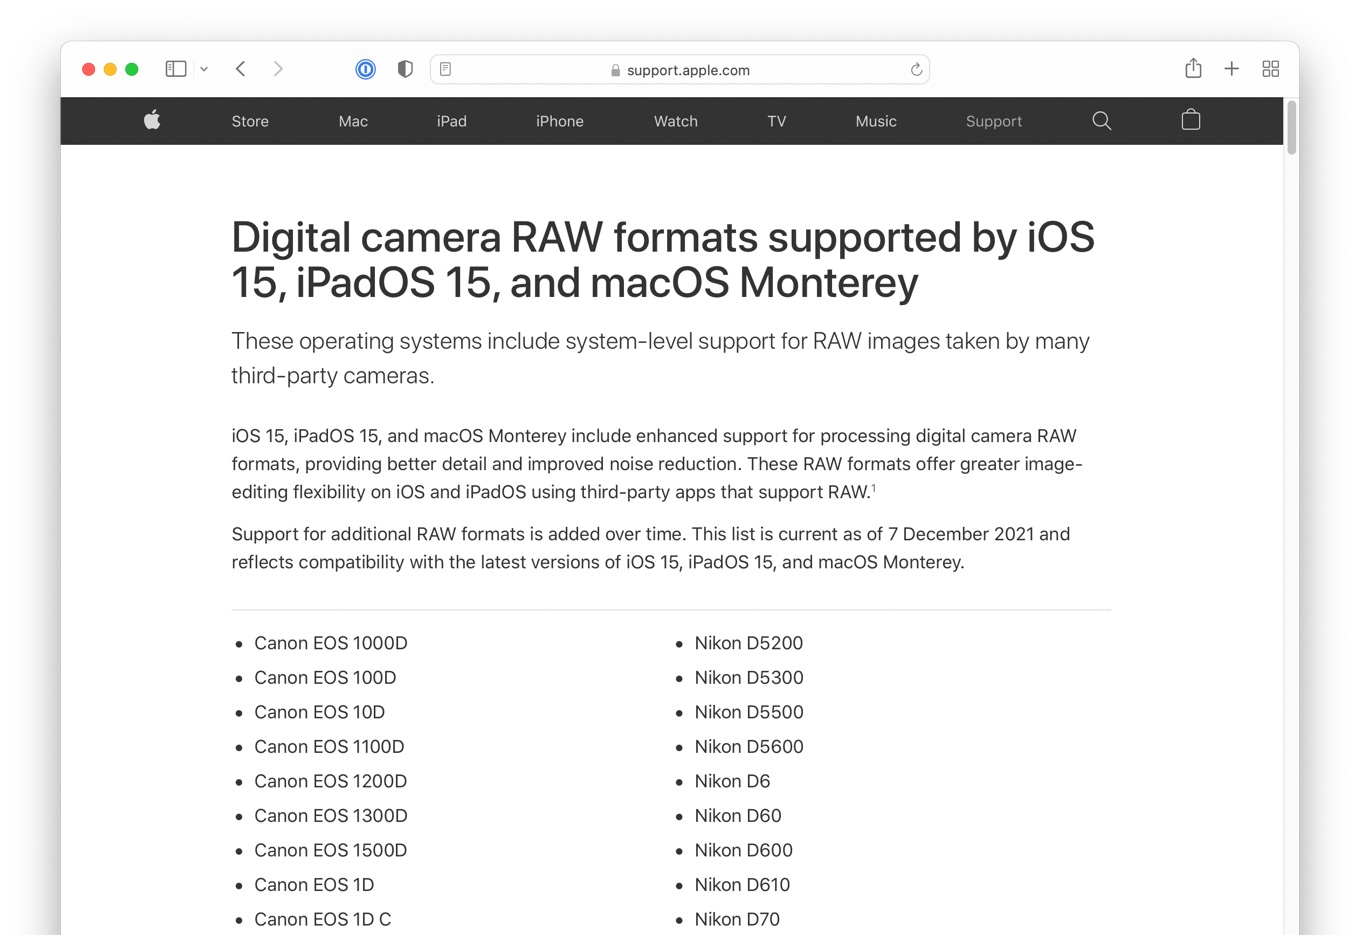 Digital camera RAW formats supported by iOS 15 iPadOS 15 and macOS Monterey